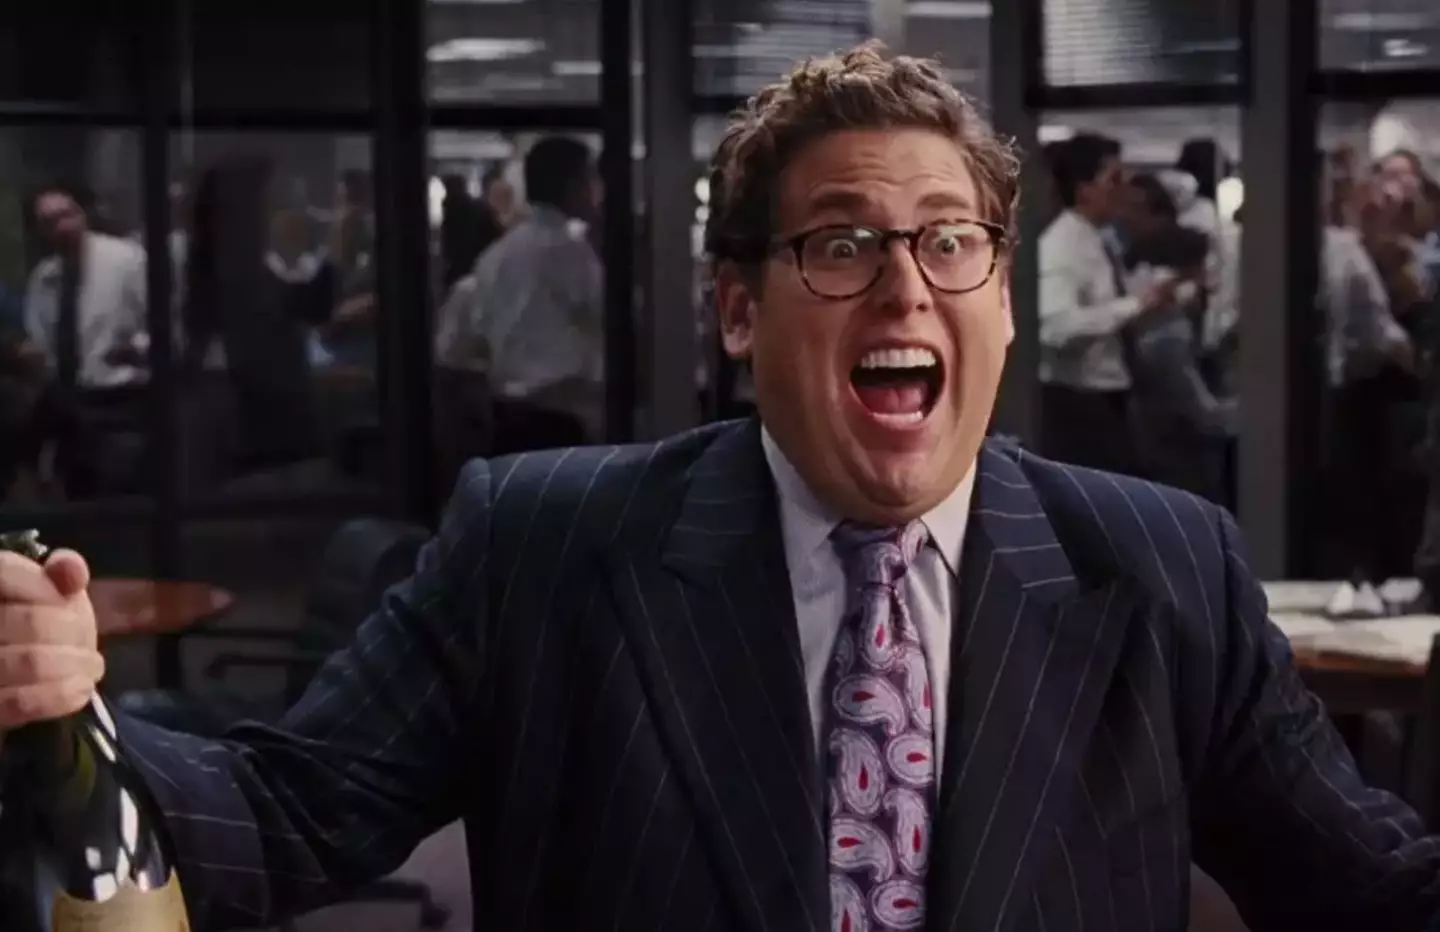 Jonah Hill was paid minimum wage for his role of Donnie Azoff.